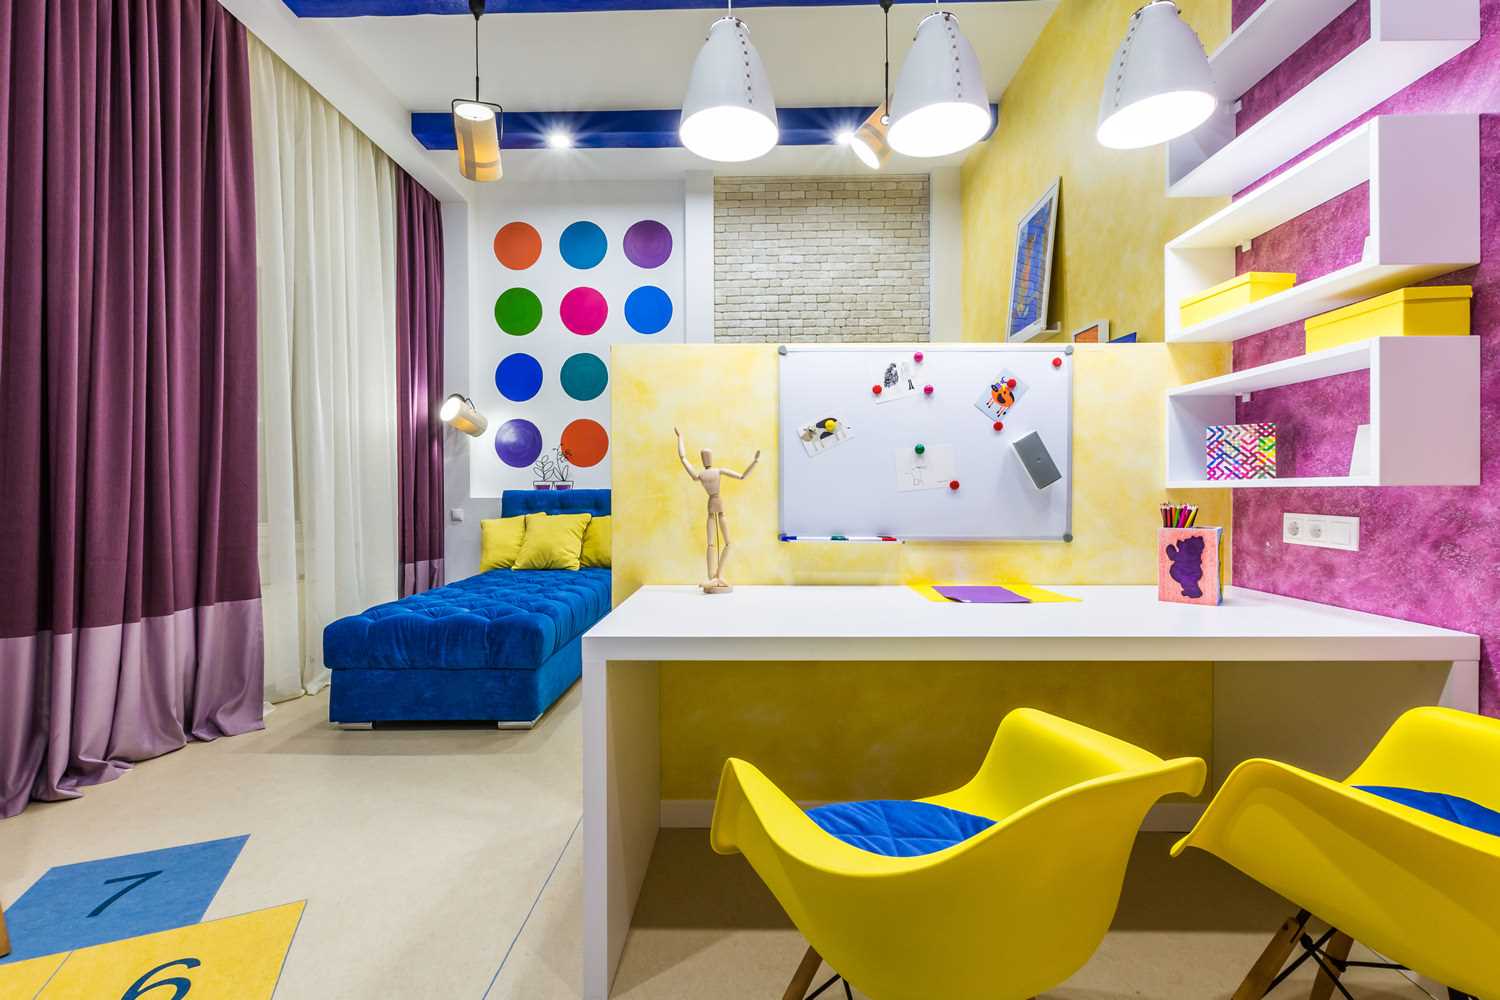 An example of a bright interior for a children's room for two girls